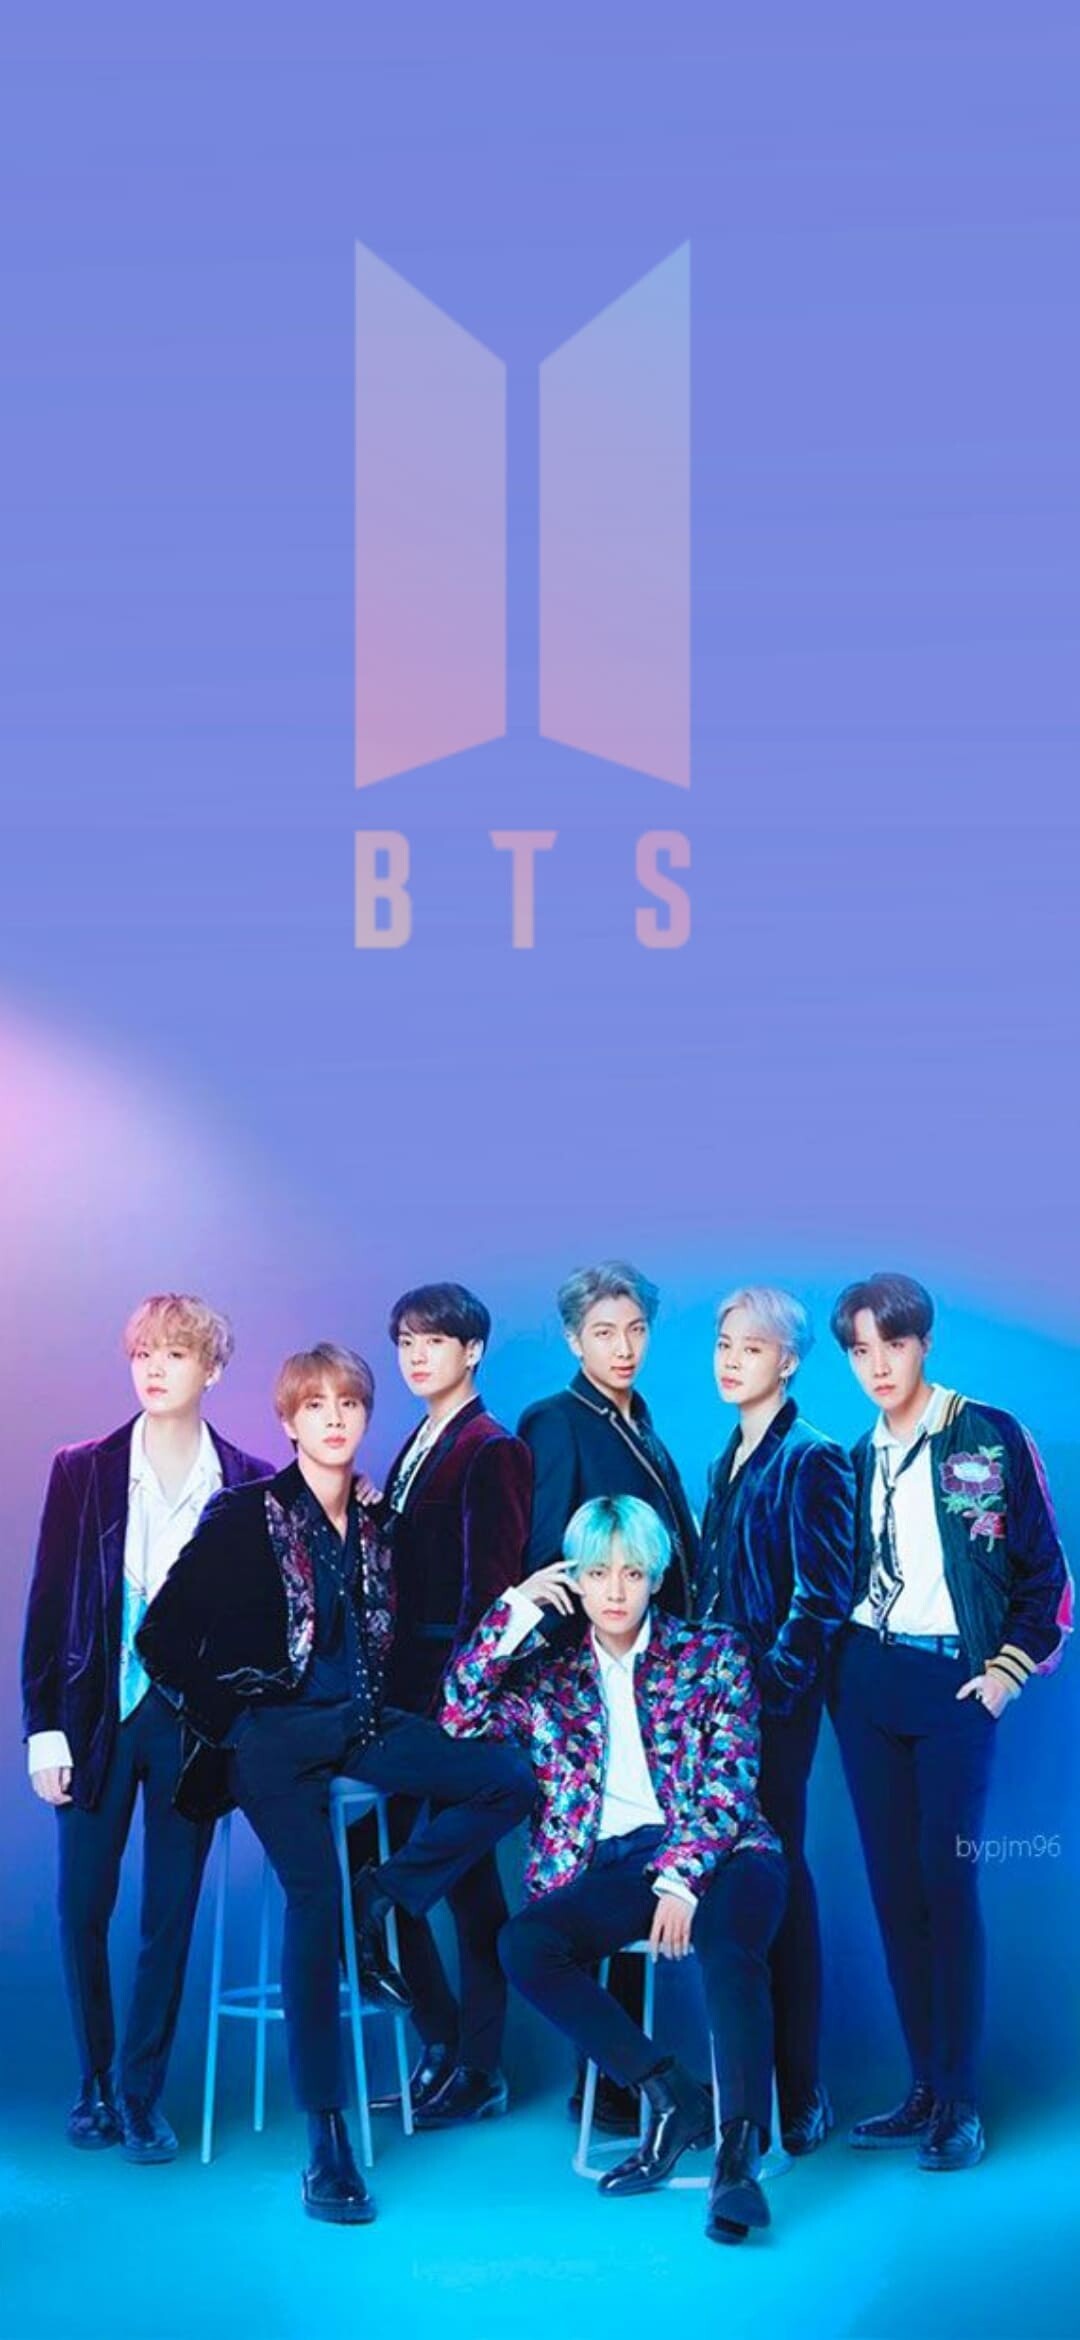 BTS: The band's Map of the Soul: 7 (2020) is the best-selling album of all time in South Korea. 1080x2340 HD Wallpaper.